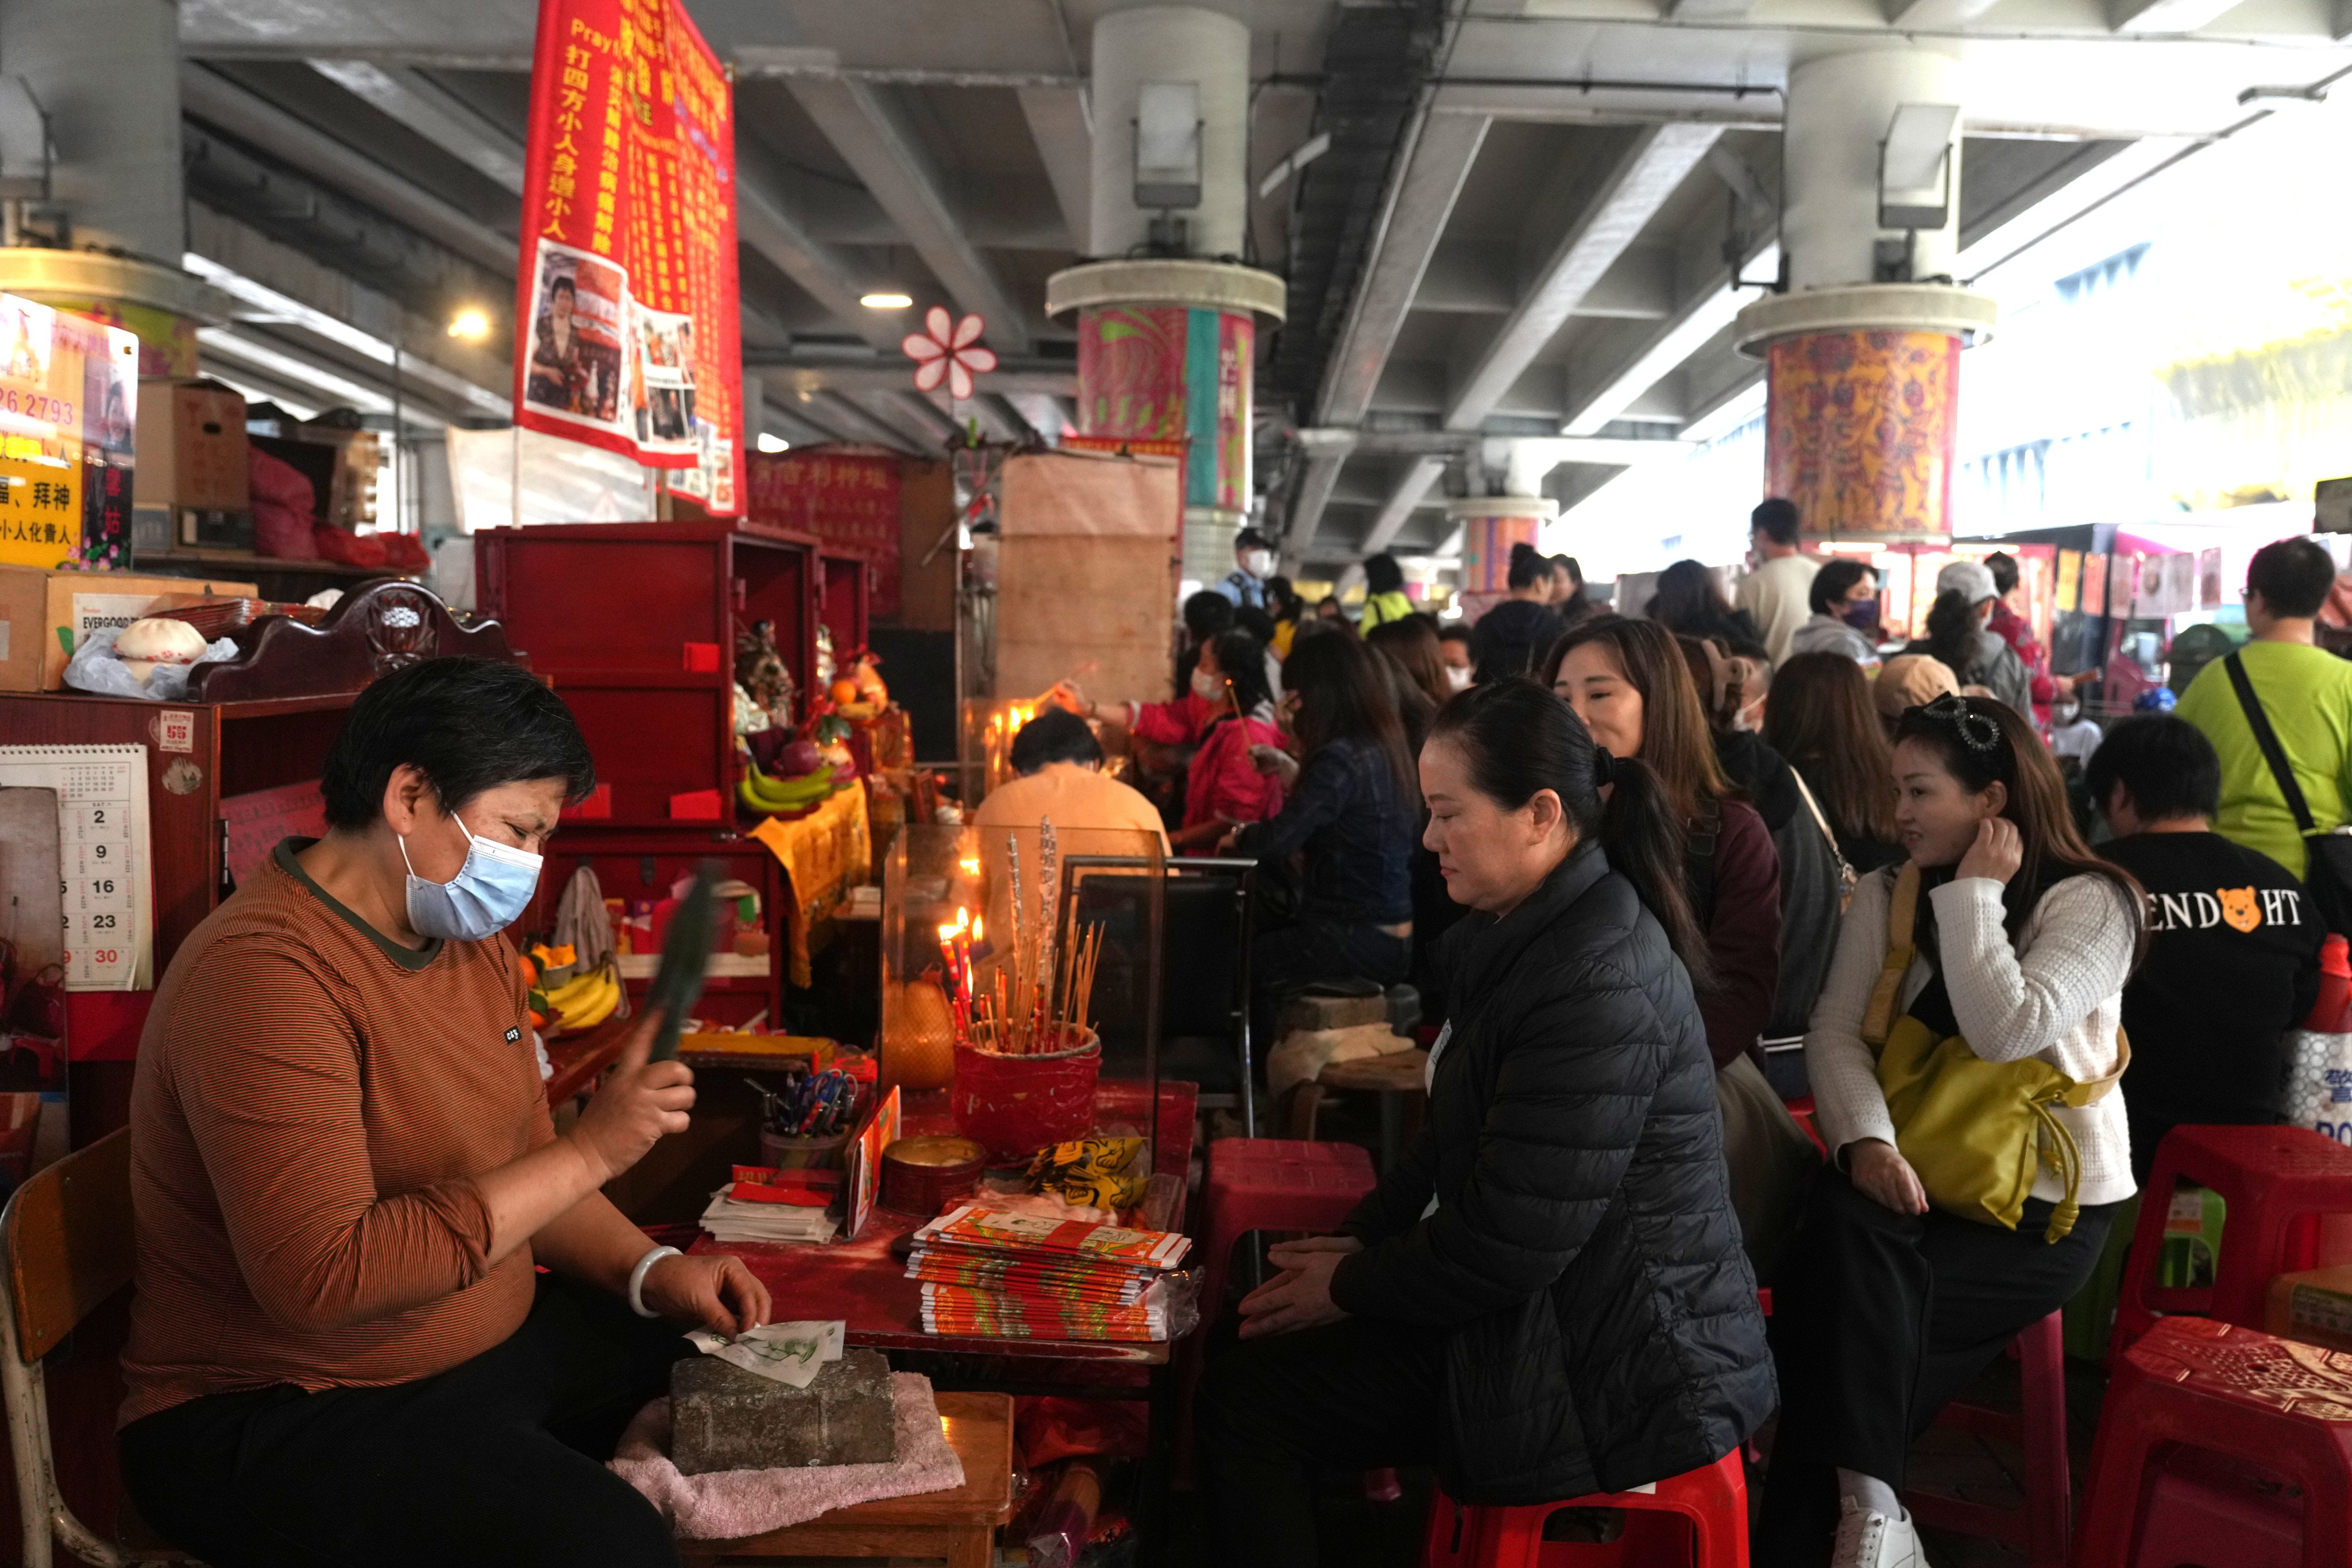 People queue for the shoe-hitting ritual. Tuesday marked the moment on the lunar calendar considered ideal for carrying out the practice. Photo: Sam Tsang